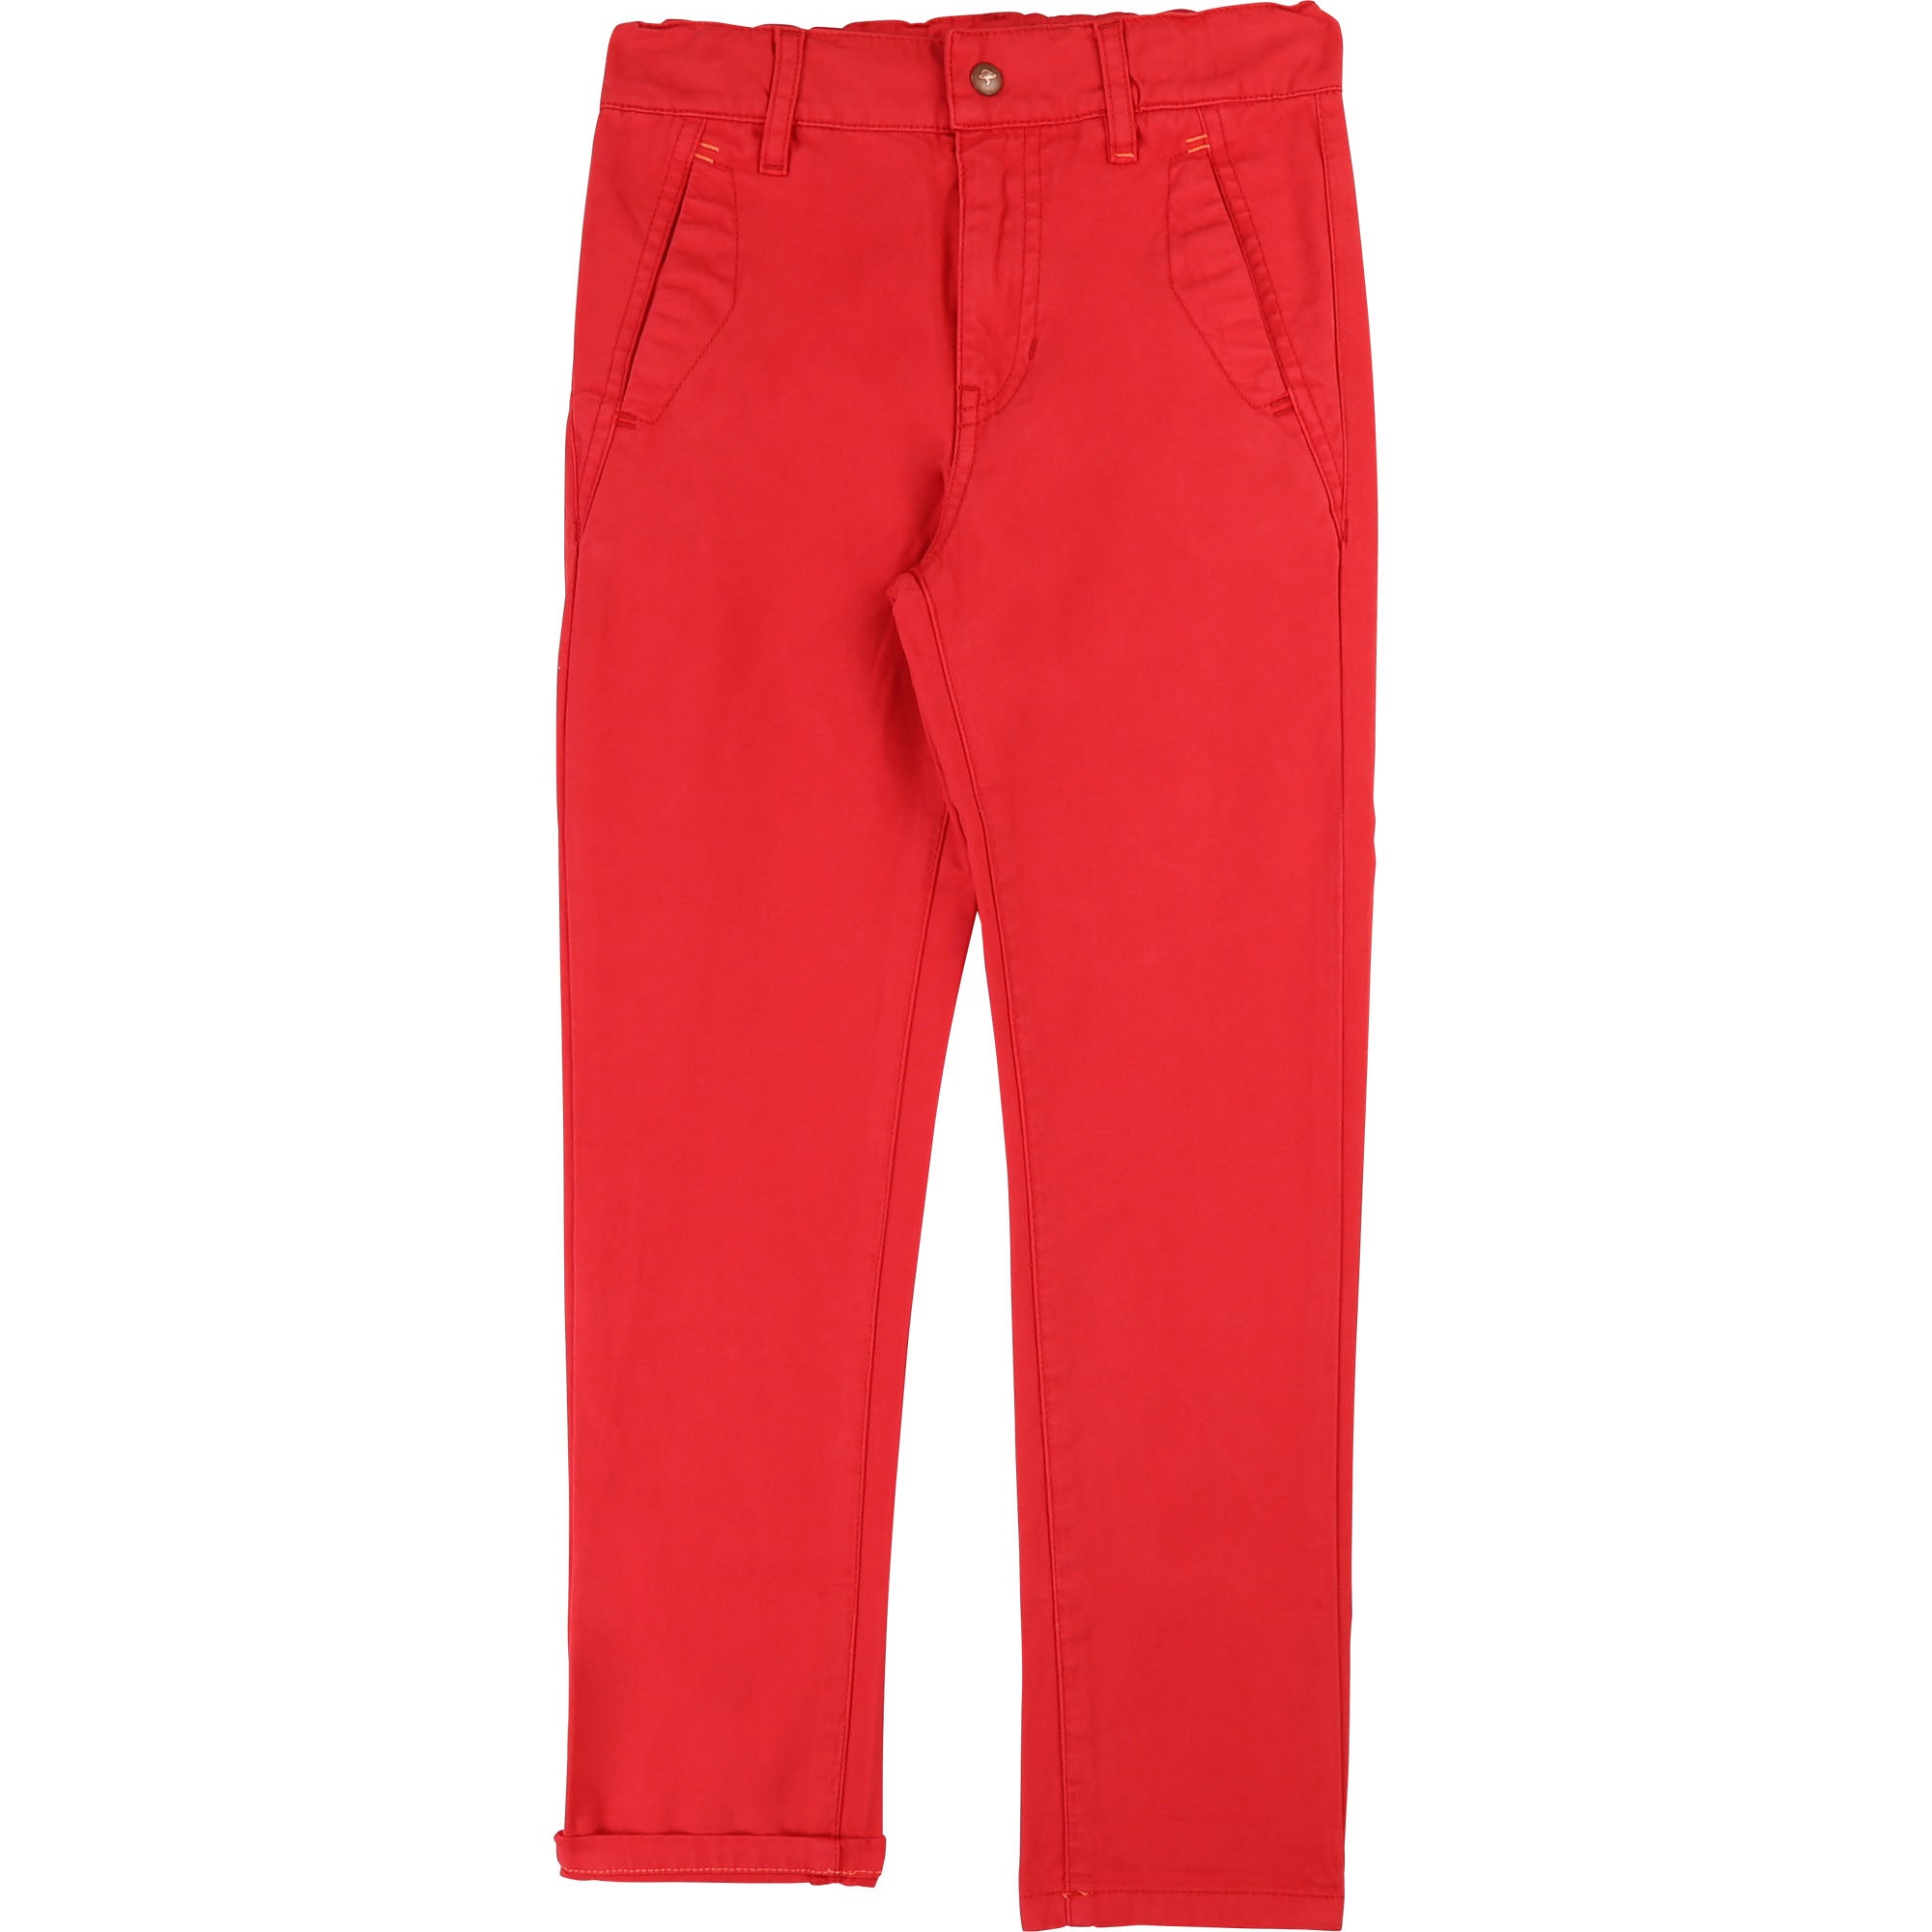 Boys Red Cotton Trousers